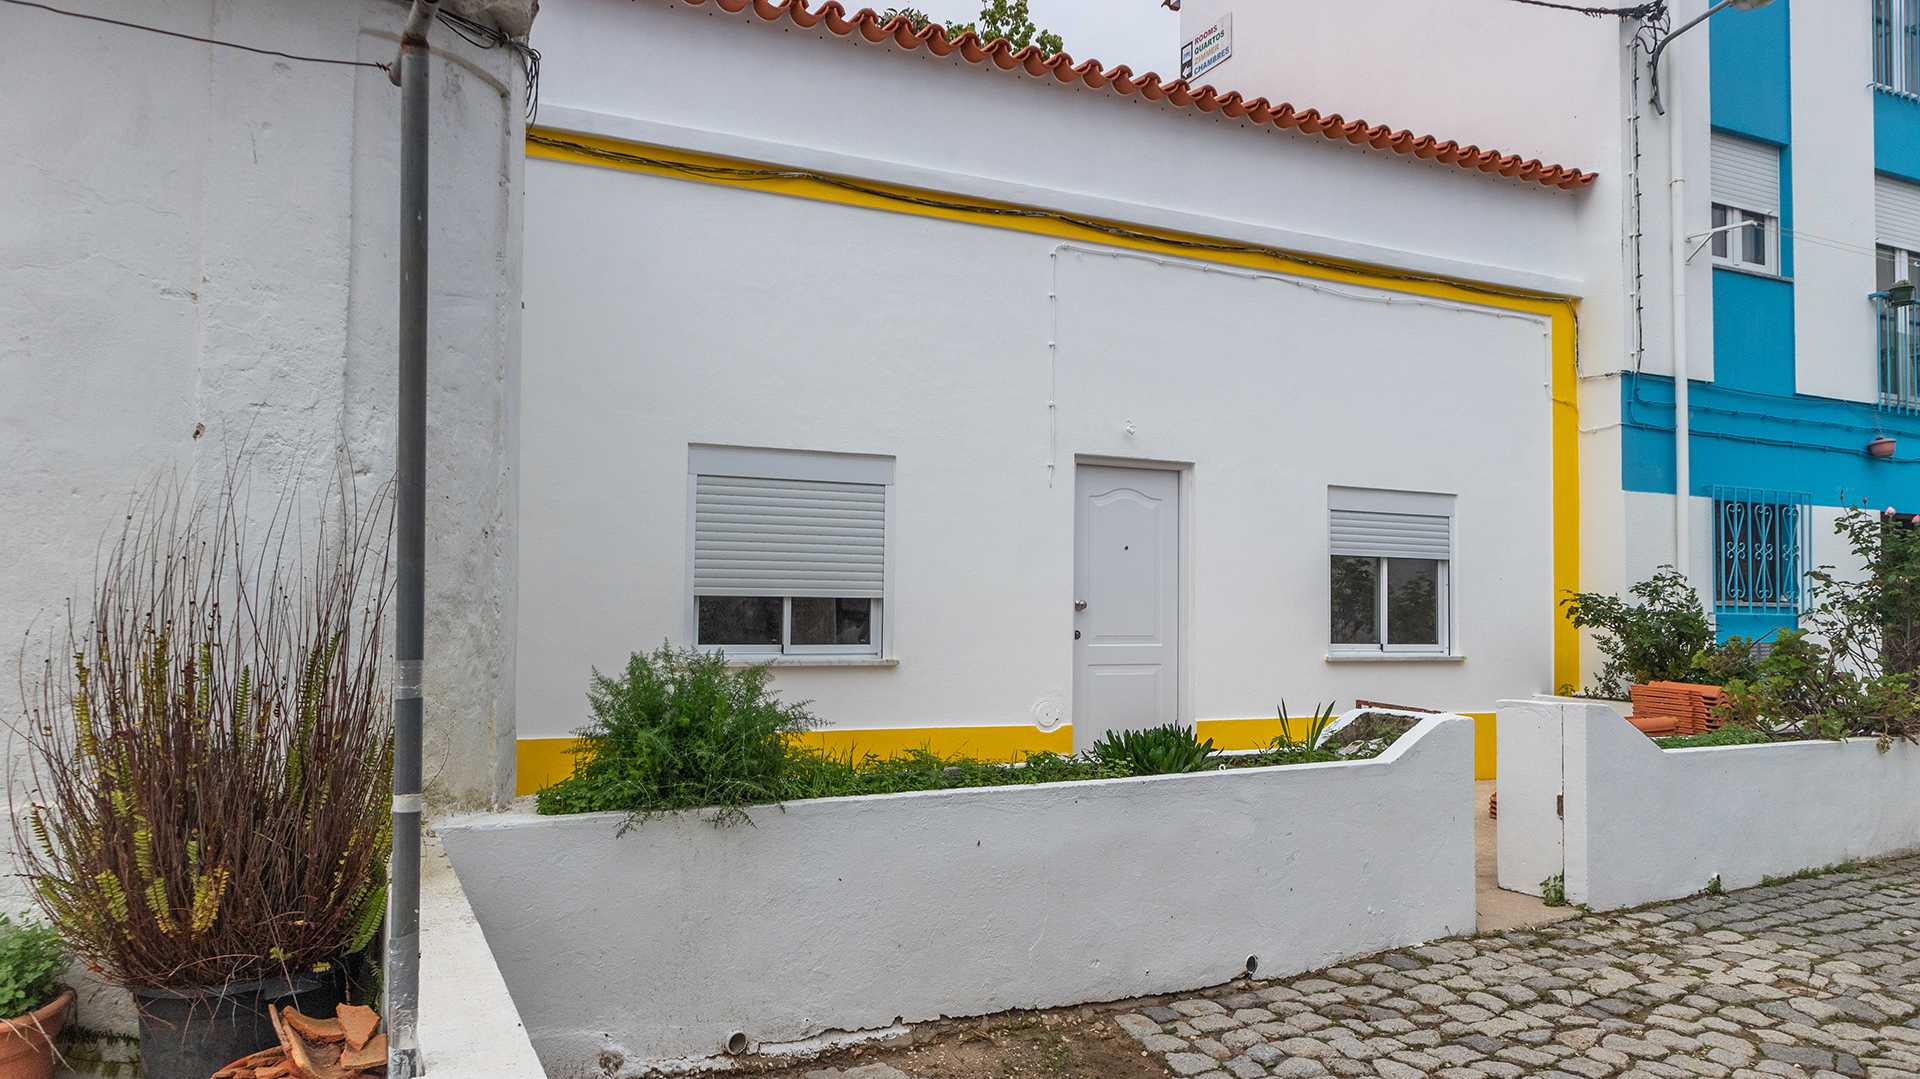 Partly renovated 2 bedroom terraced house near the centre of Monchique | LG2018 One of only three terraced houses in a quiet spot but very close to the town centre with restaurants, shops, market, municipal swimming pool and all other amenities. 
Probably could be finished for approx. €25.000.
